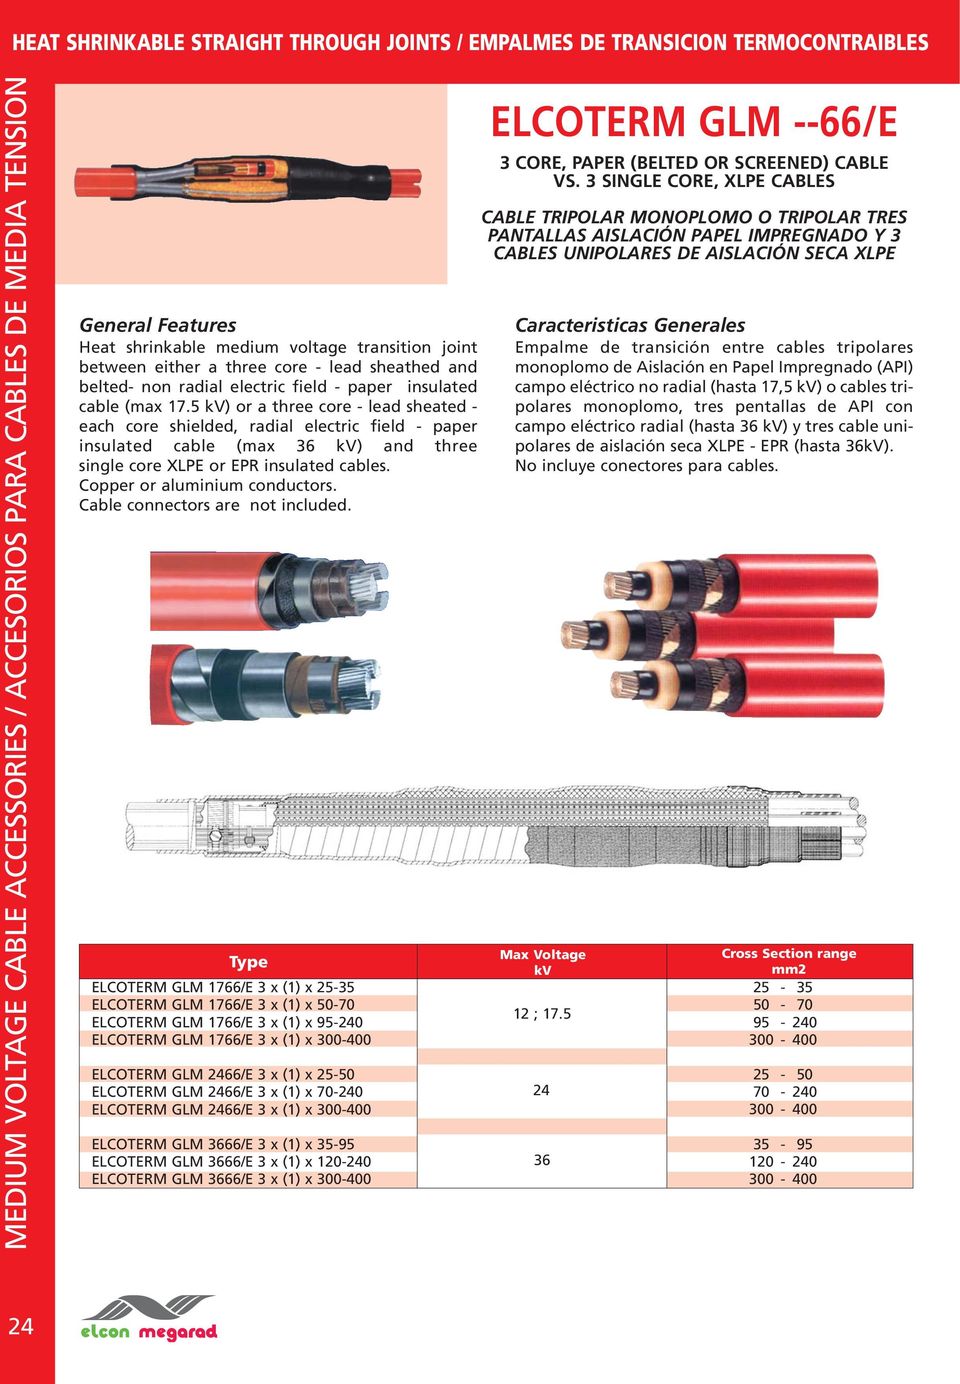 5 ) or a three core - lead sheated - each core shielded, radial electric field - paper insulated cable (max ) and three single core XLPE or EPR insulated cables. Copper or aluminium conductors.